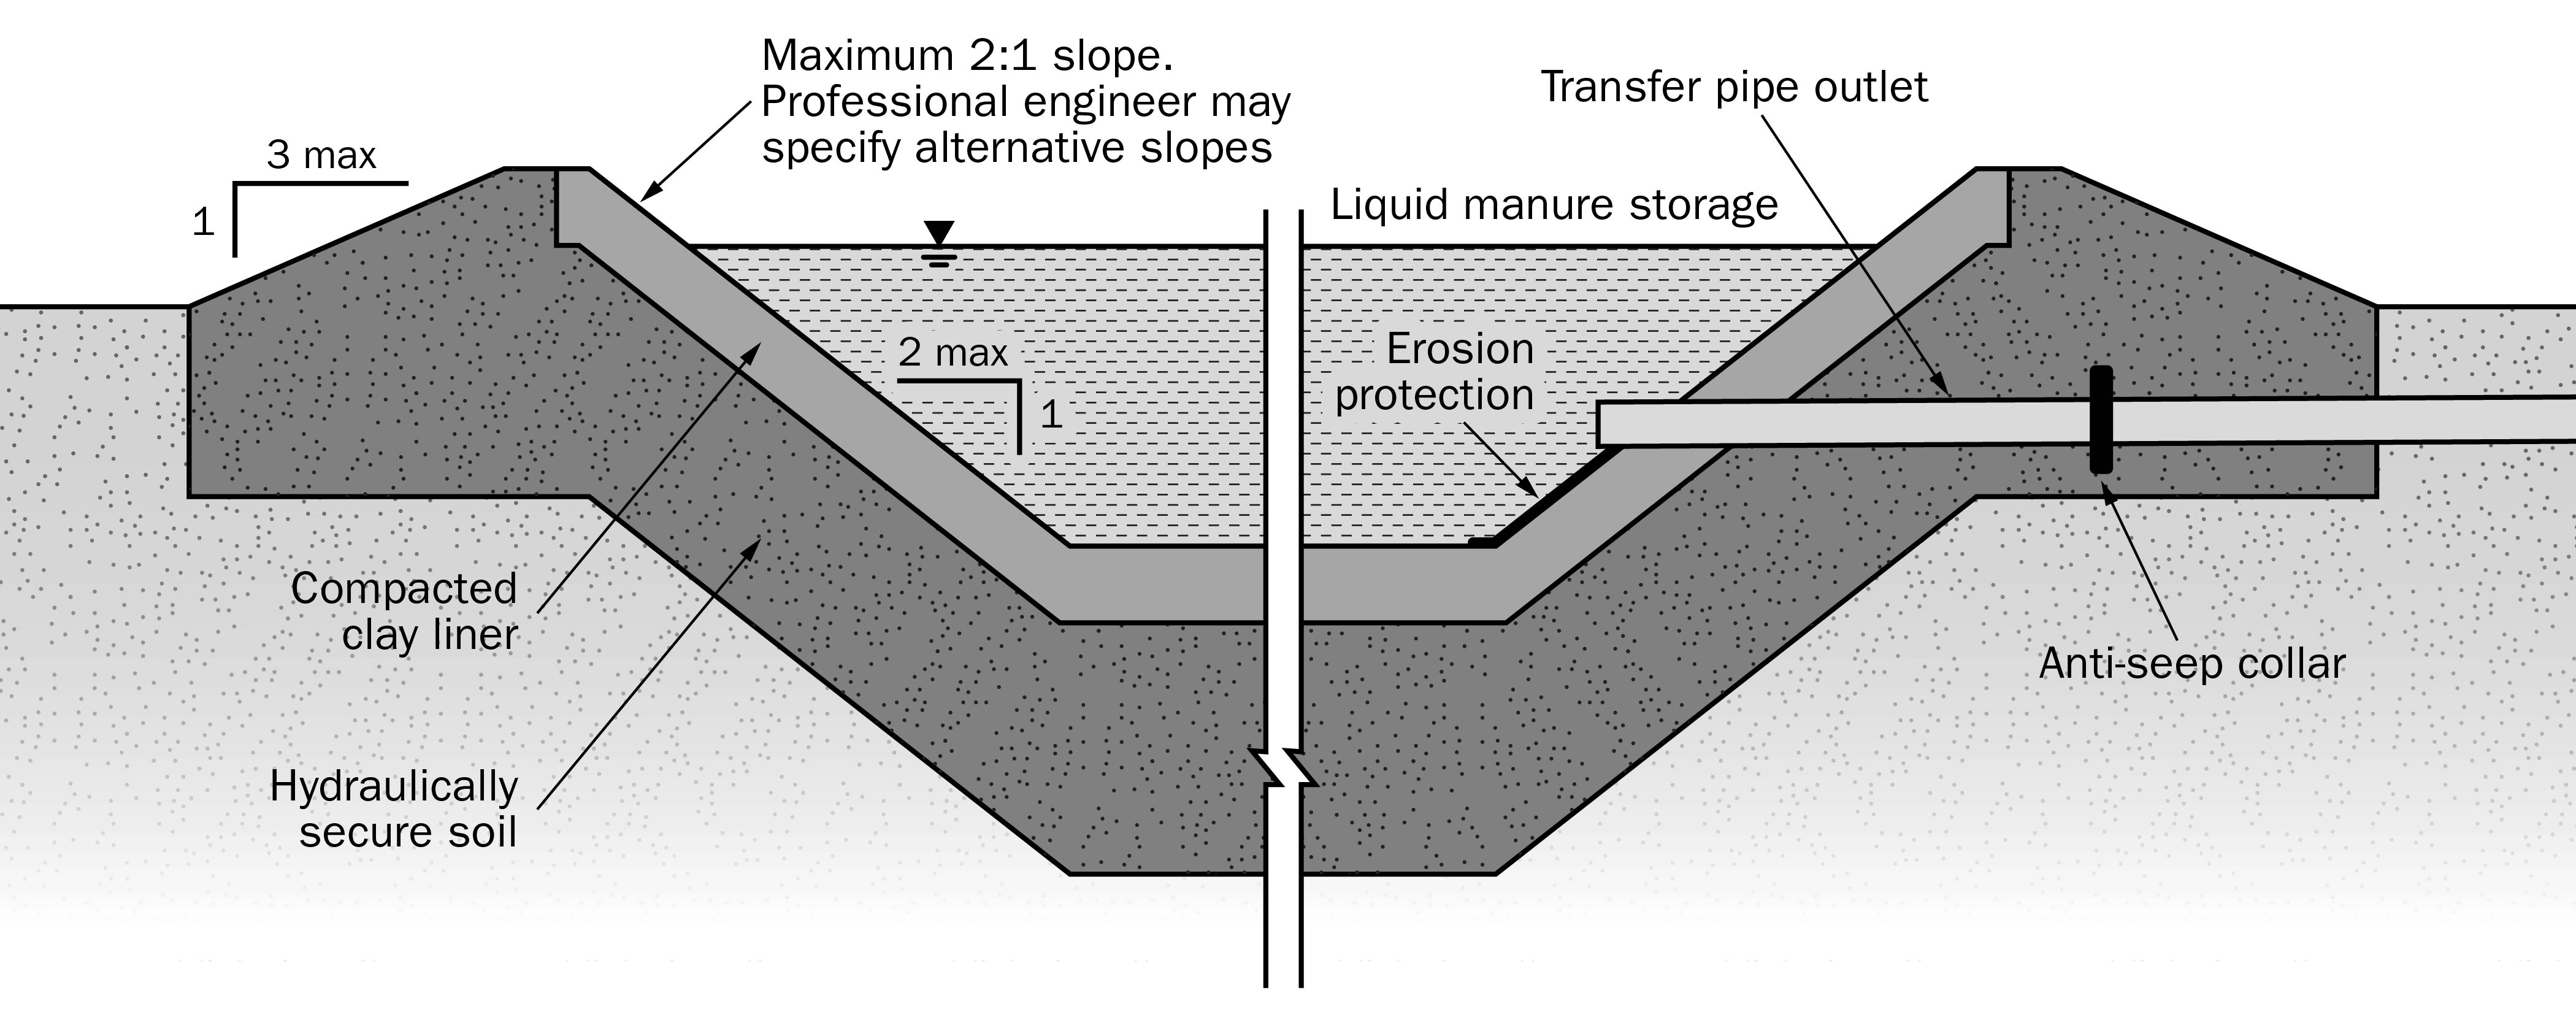 A drawing showing a cross-section of an earthen manure storage with pipe penetration through a clay liner.